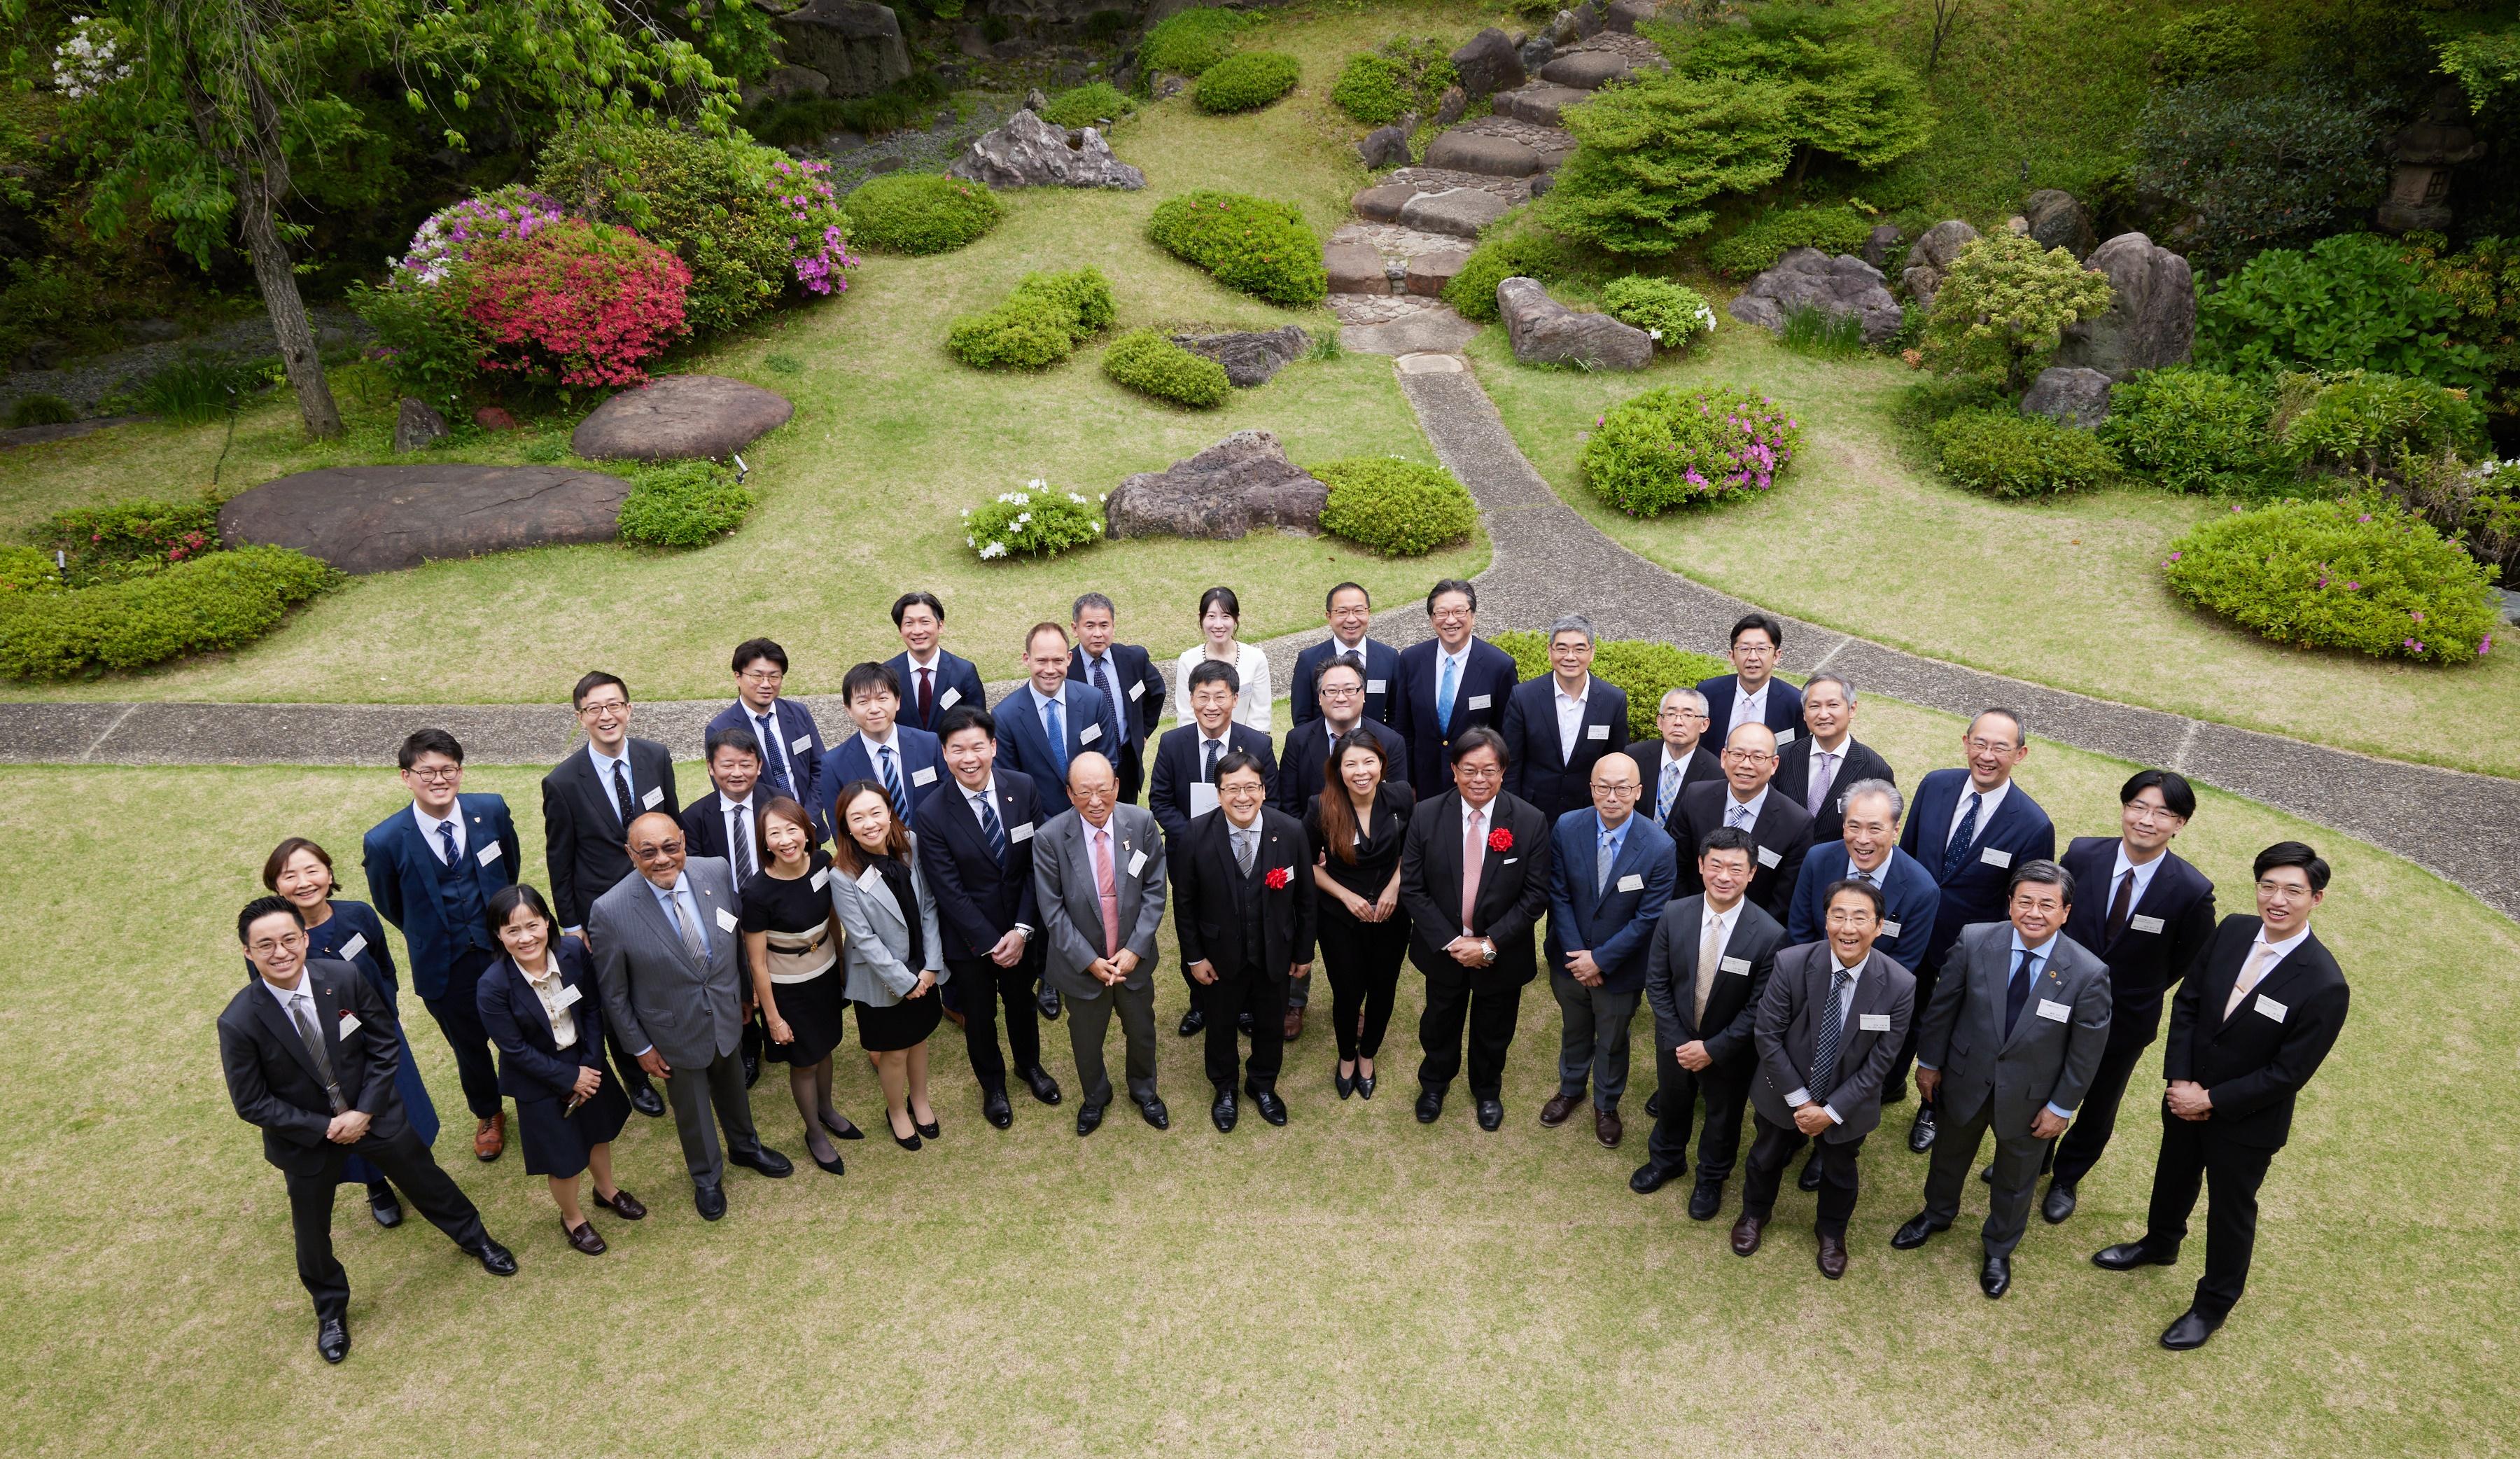 The Hong Kong Economic and Trade Office (Tokyo) and the Law Society of Hong Kong jointly held a networking luncheon in Tokyo, Japan, today (April 26).  The luncheon was attended by a good mix of business leaders and legal practitioners in Japan, as well as representatives of the Law Society of Hong Kong.